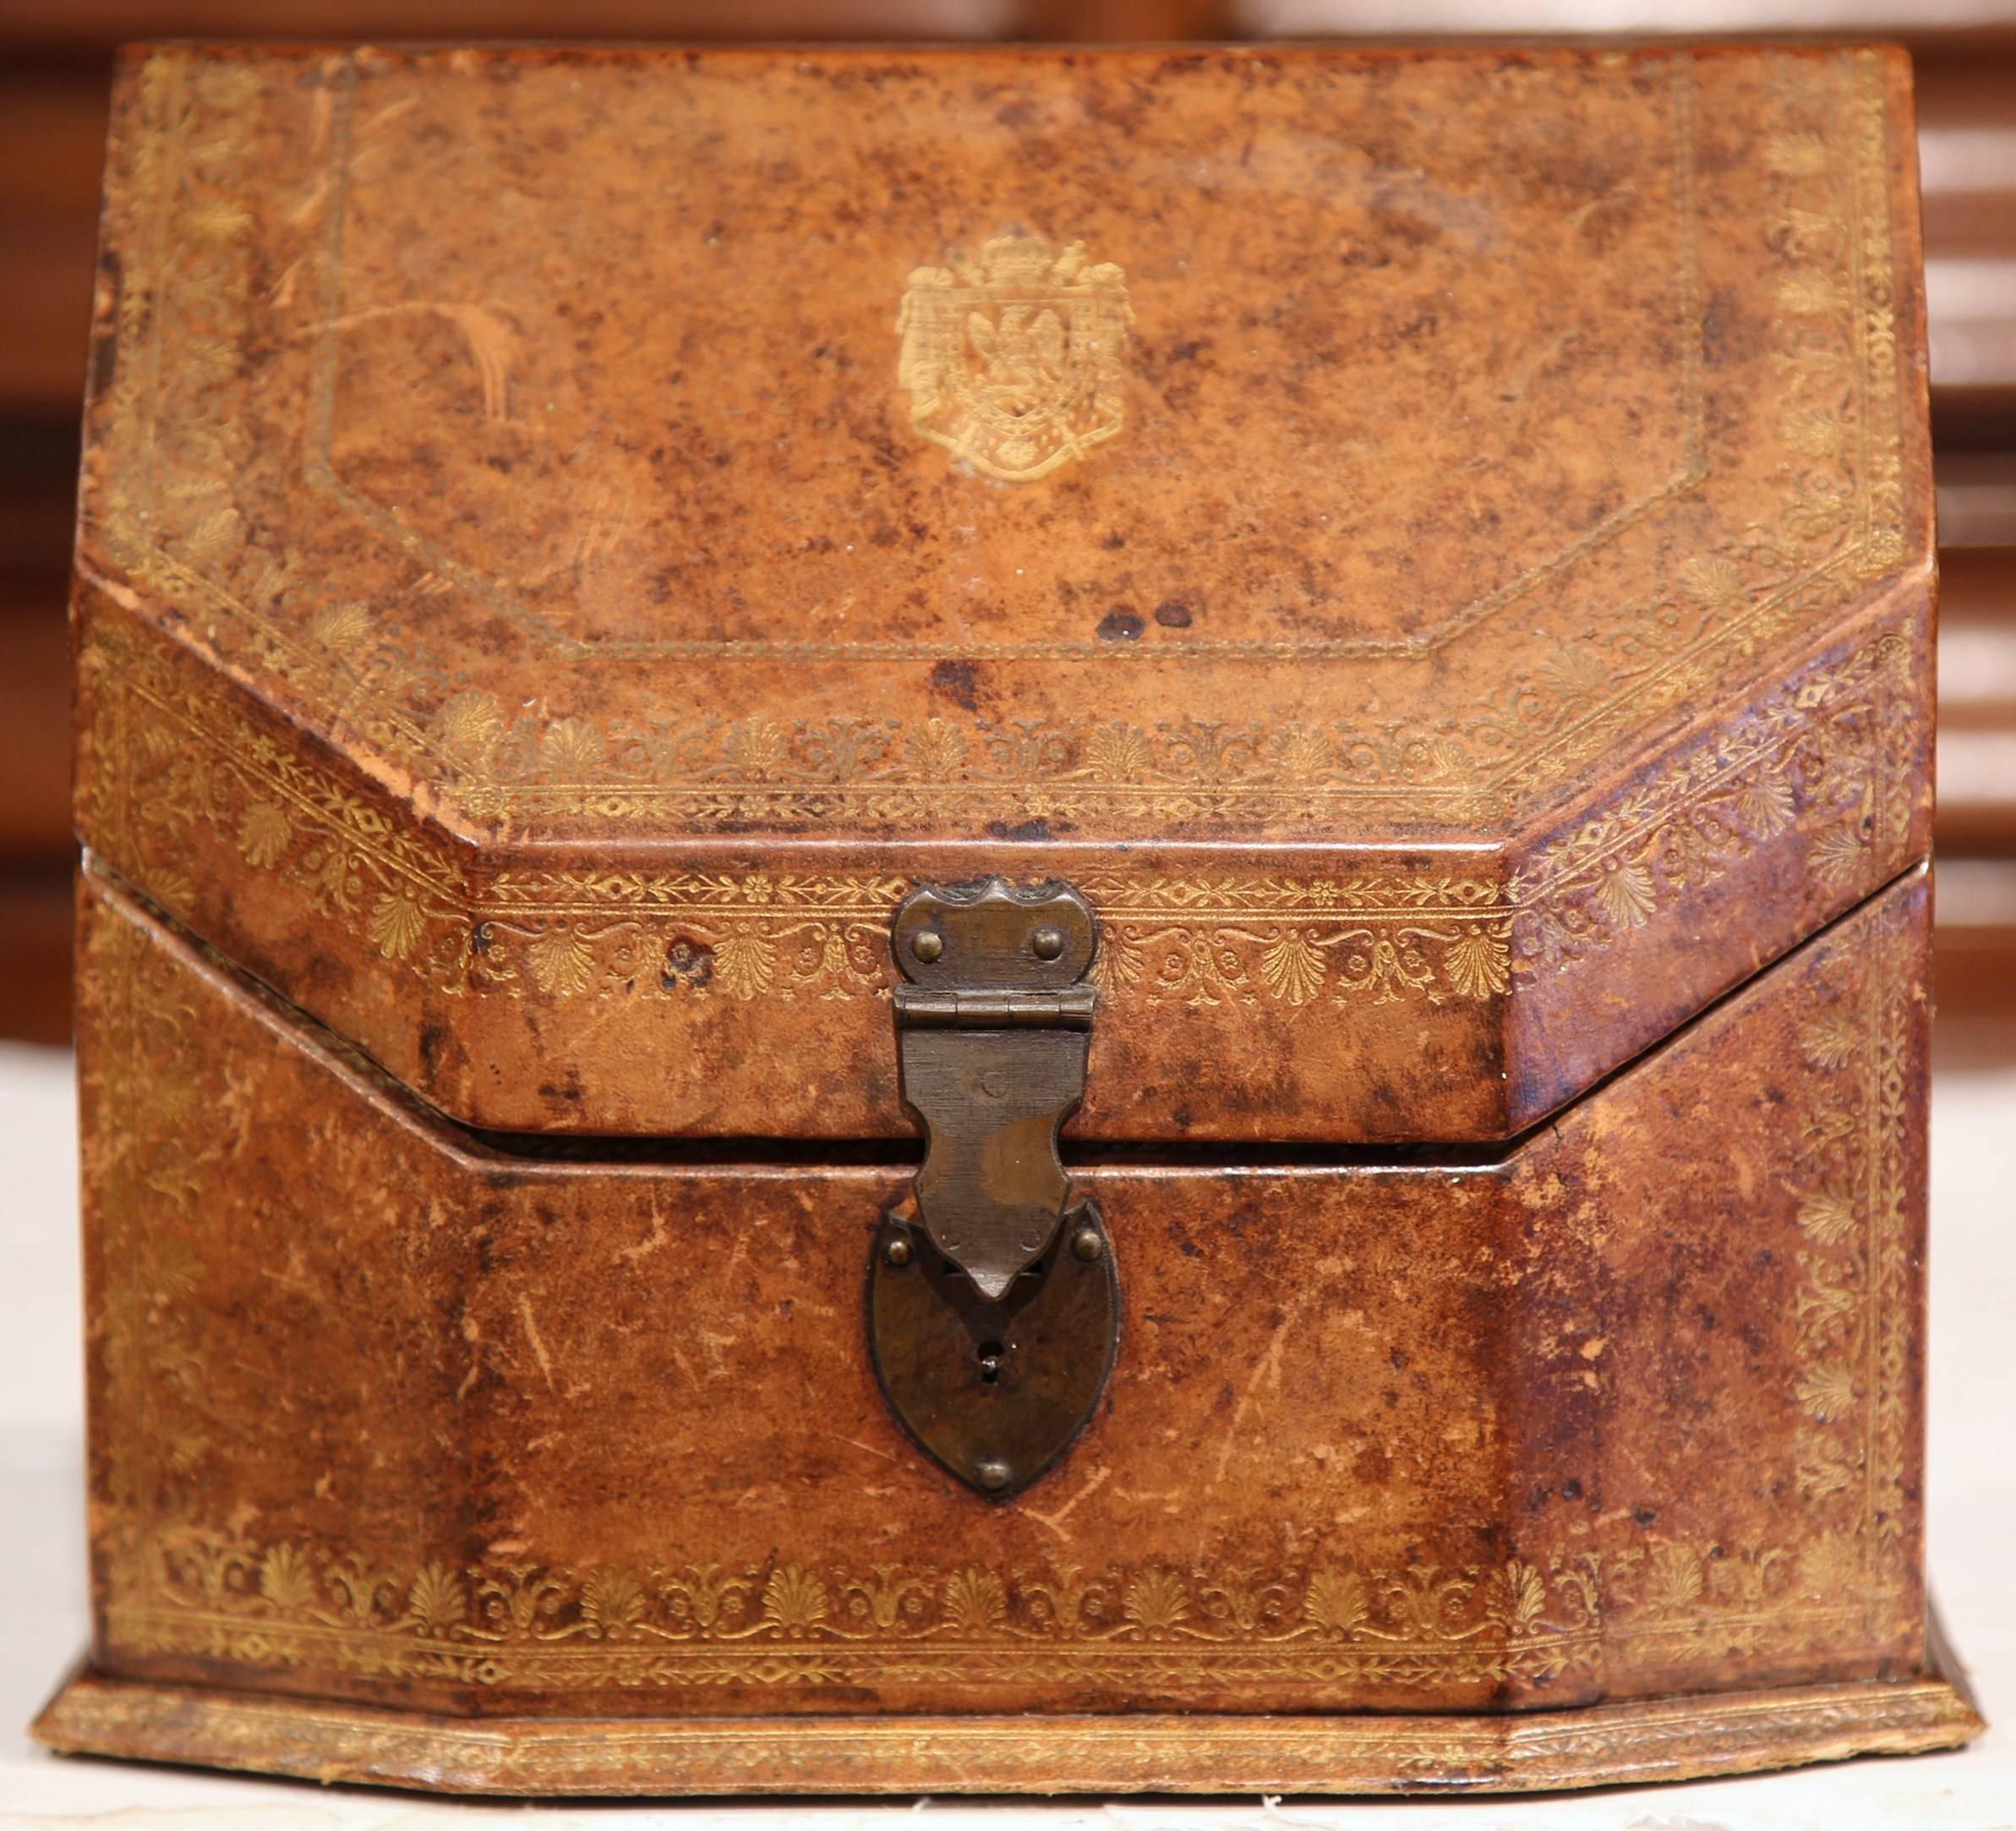 Decorate your desk or office with this beautifully crafted letter holder from France, circa 1880. The embellished box has a brown leather exterior with intricate tooling, and pastel marbled paper on the inside. The top of the box has an engraved